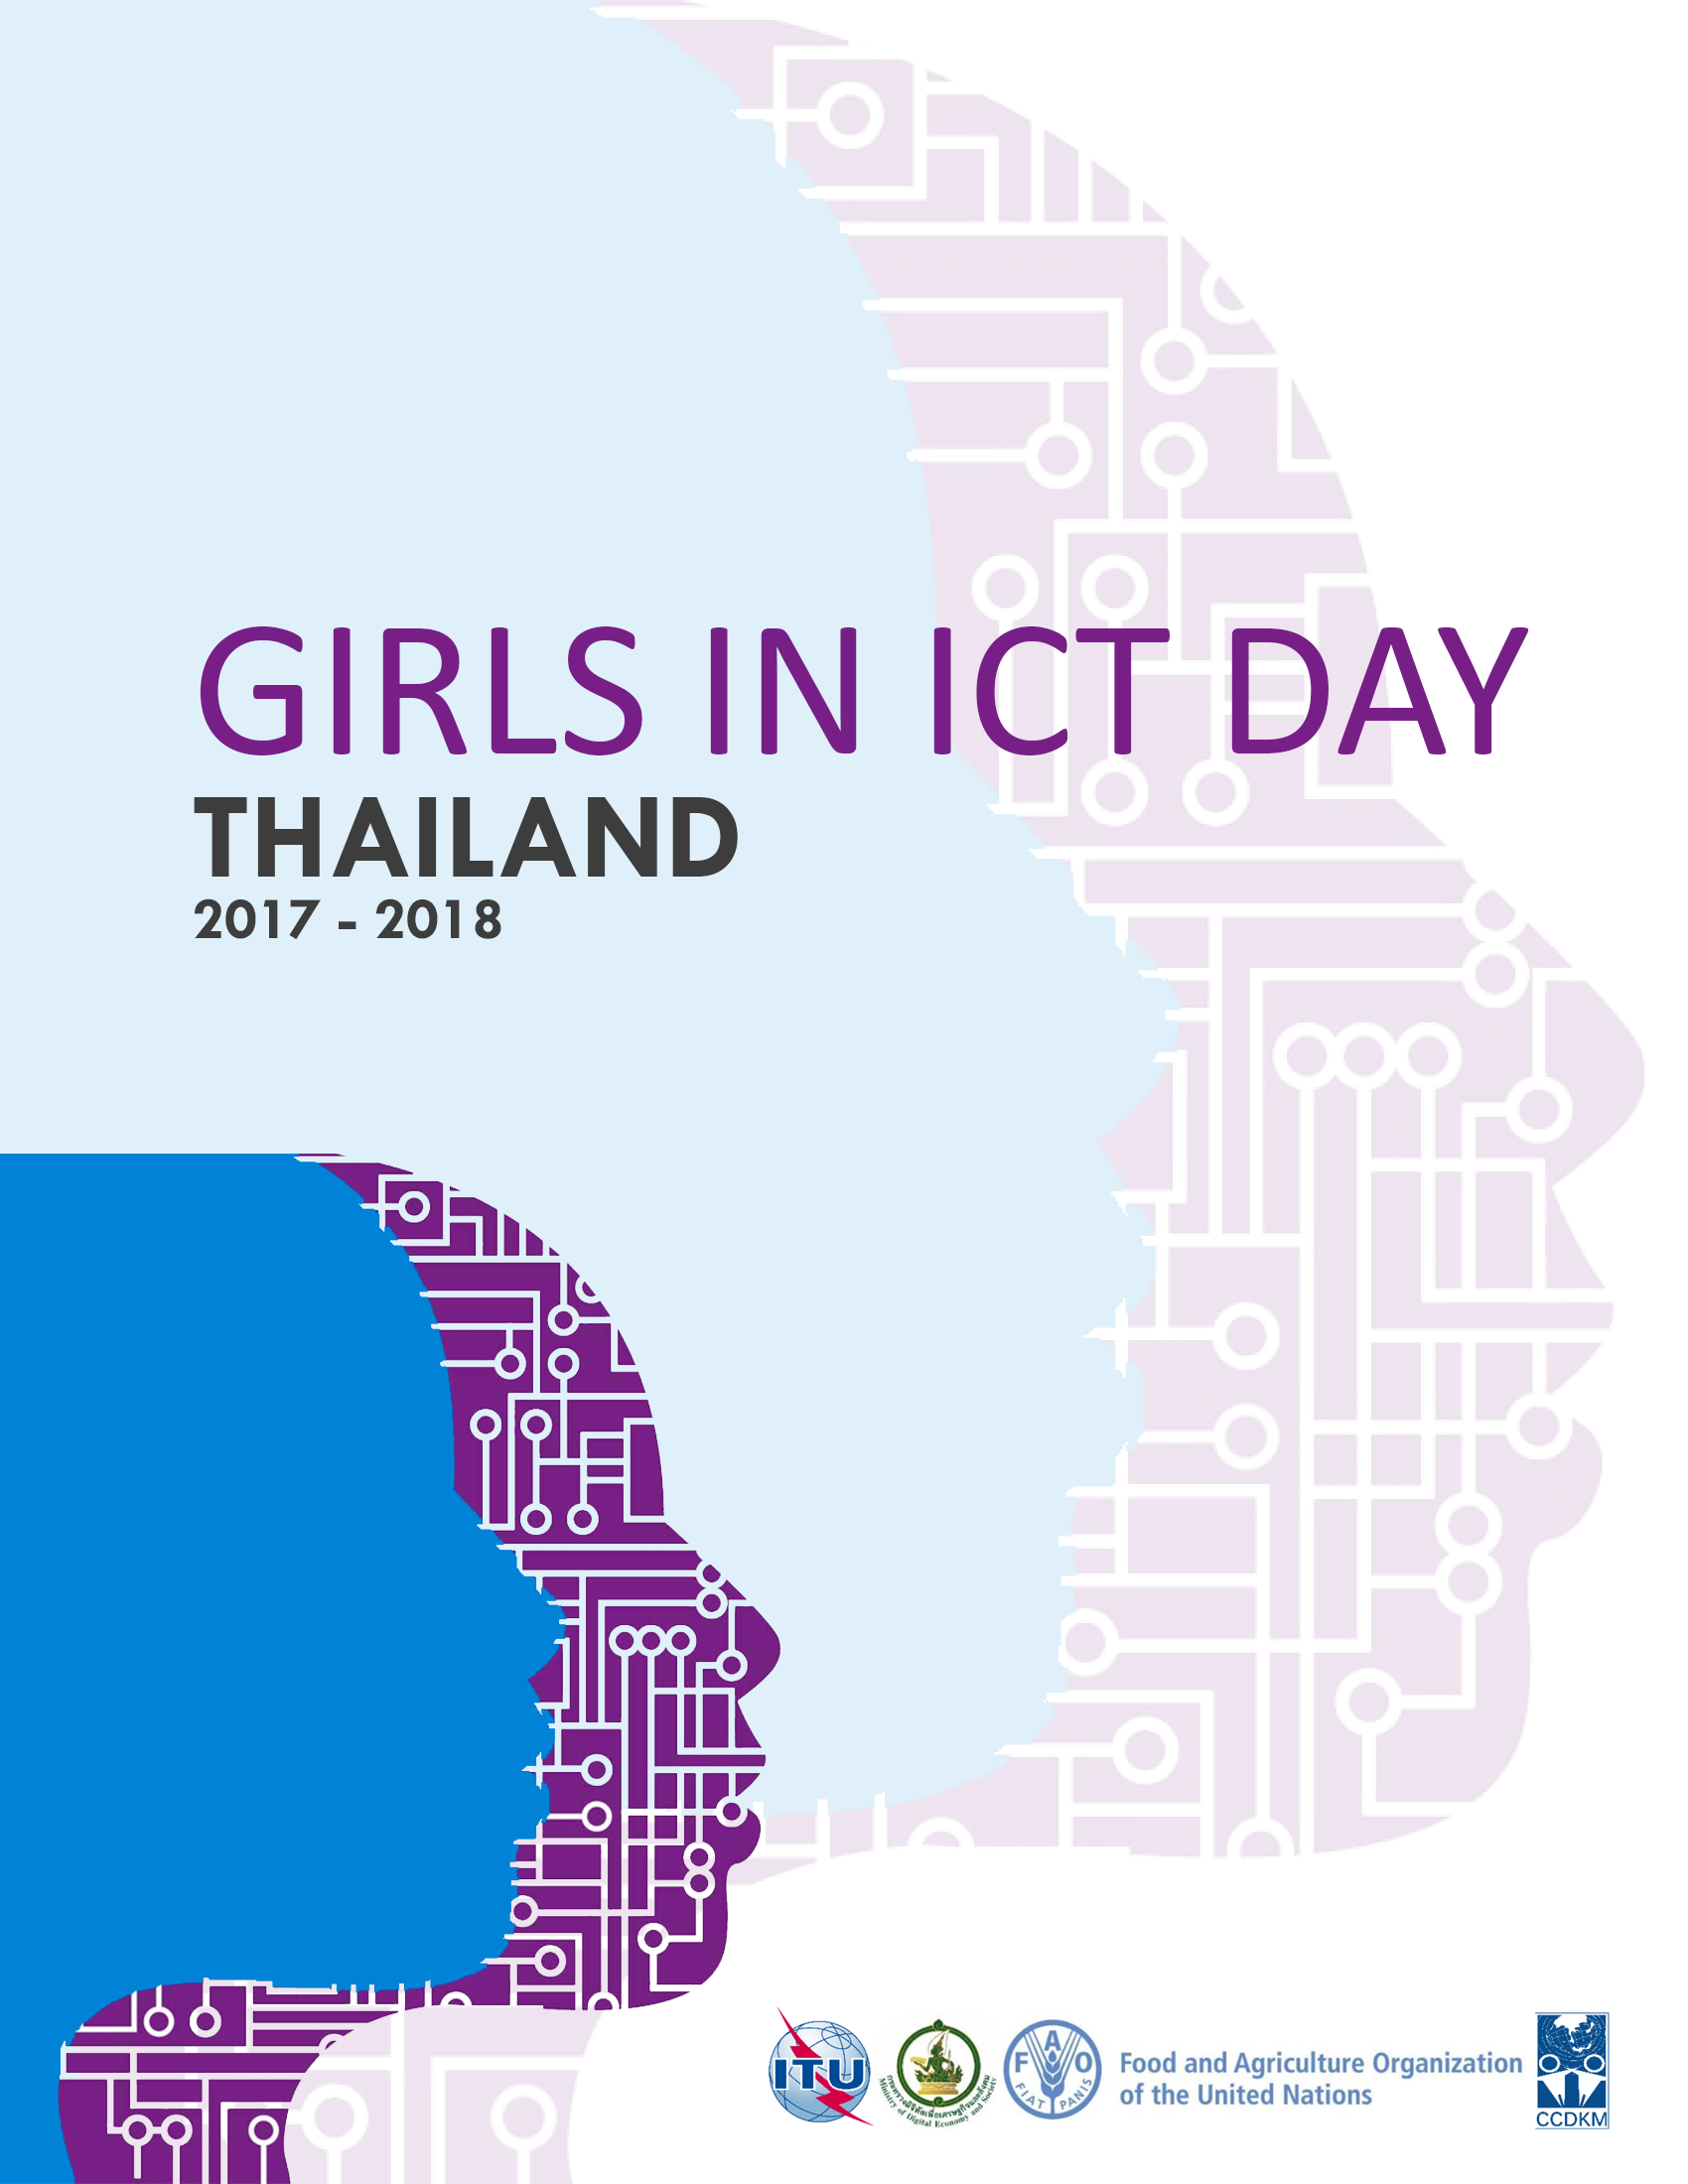 Girls in ICT Day 2017 - 2018